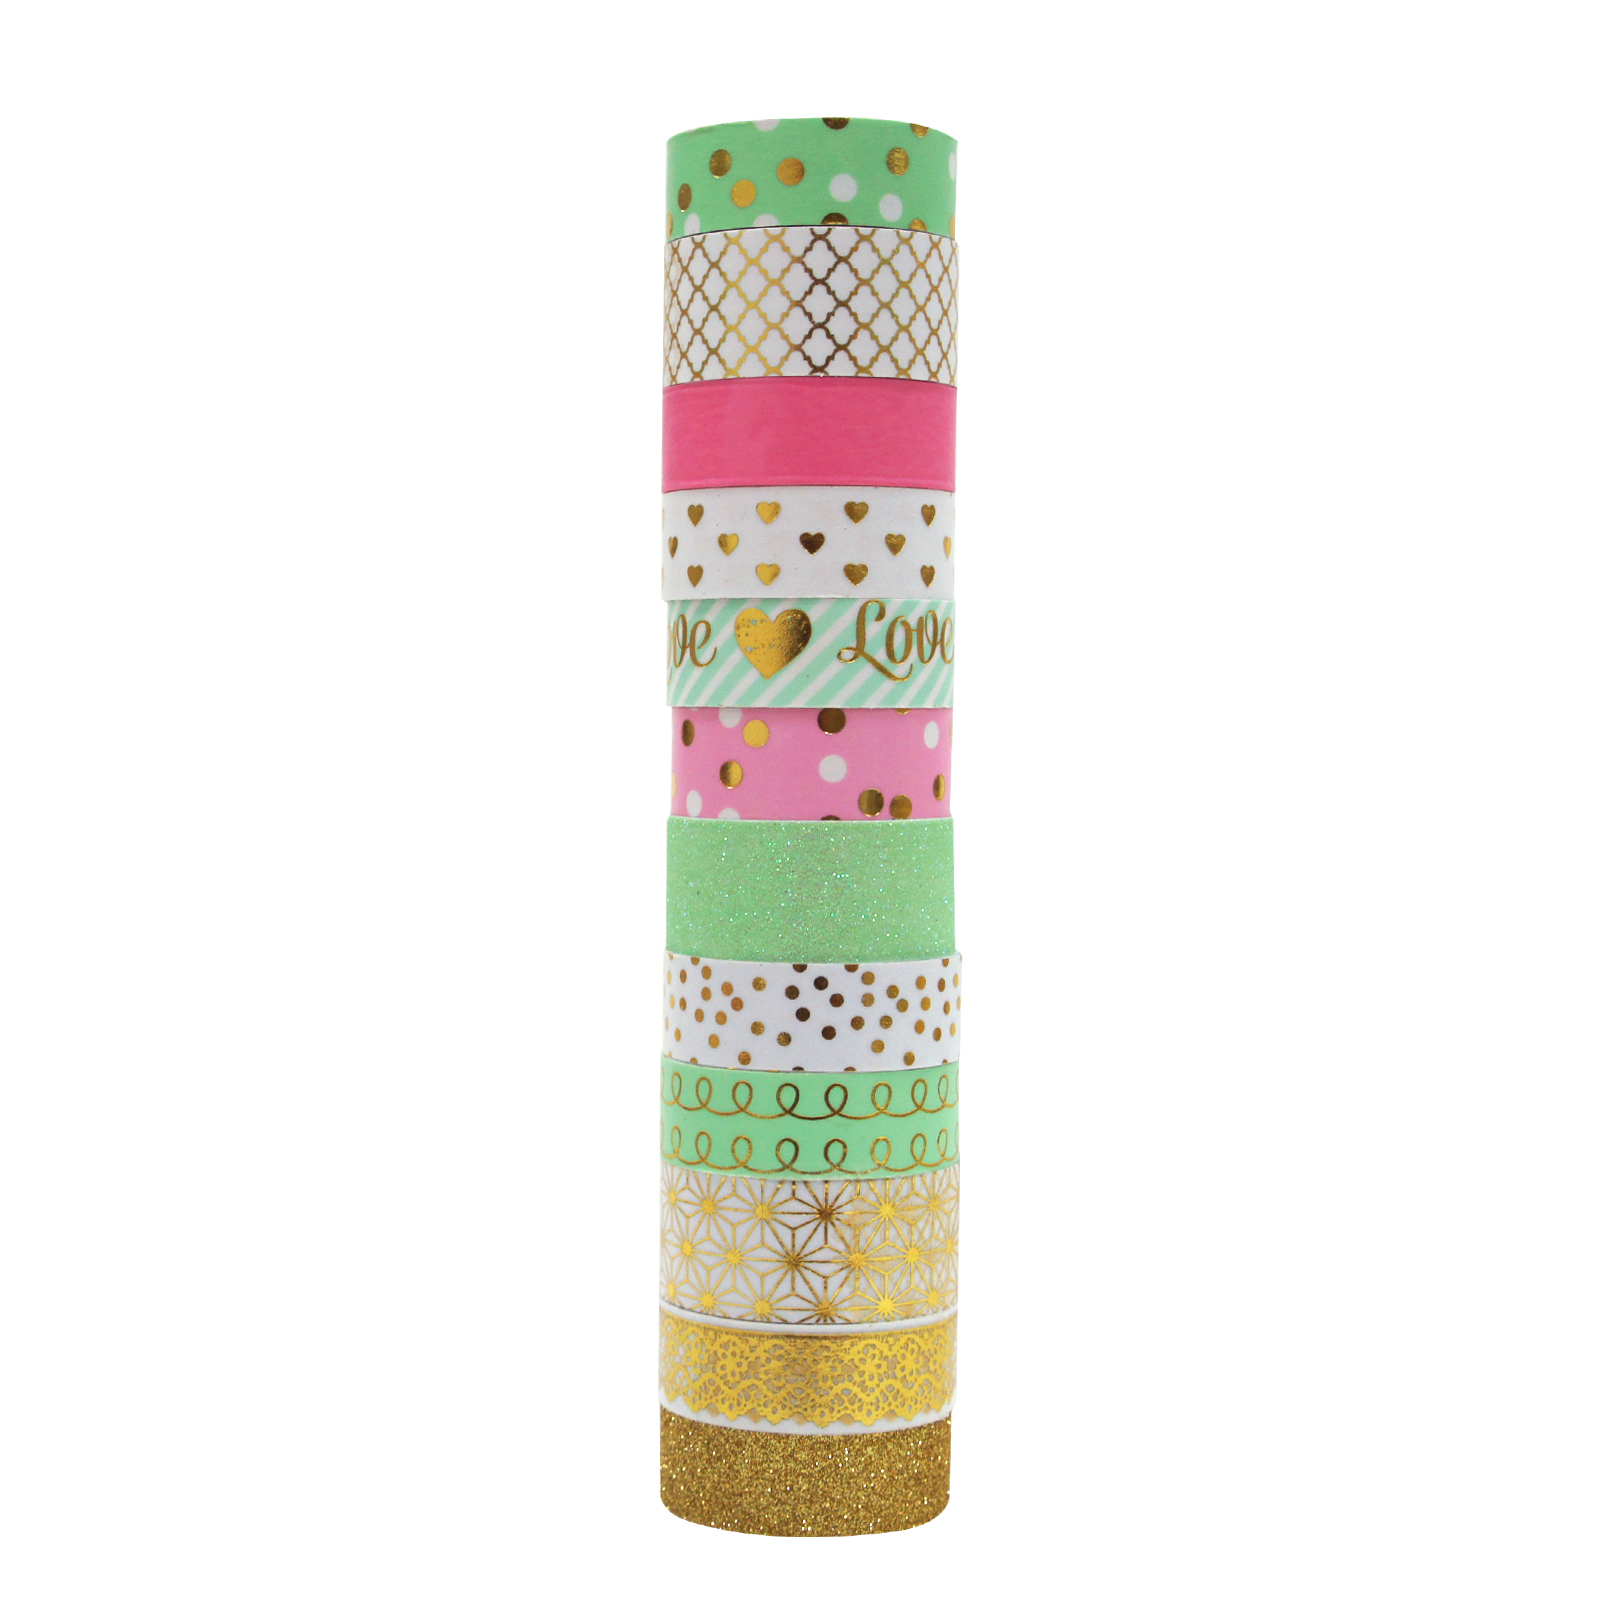 http://www.michaels.com/blush-washi-tape-tube-by-recollections/10464889.html#q=recollections+washi&start=4